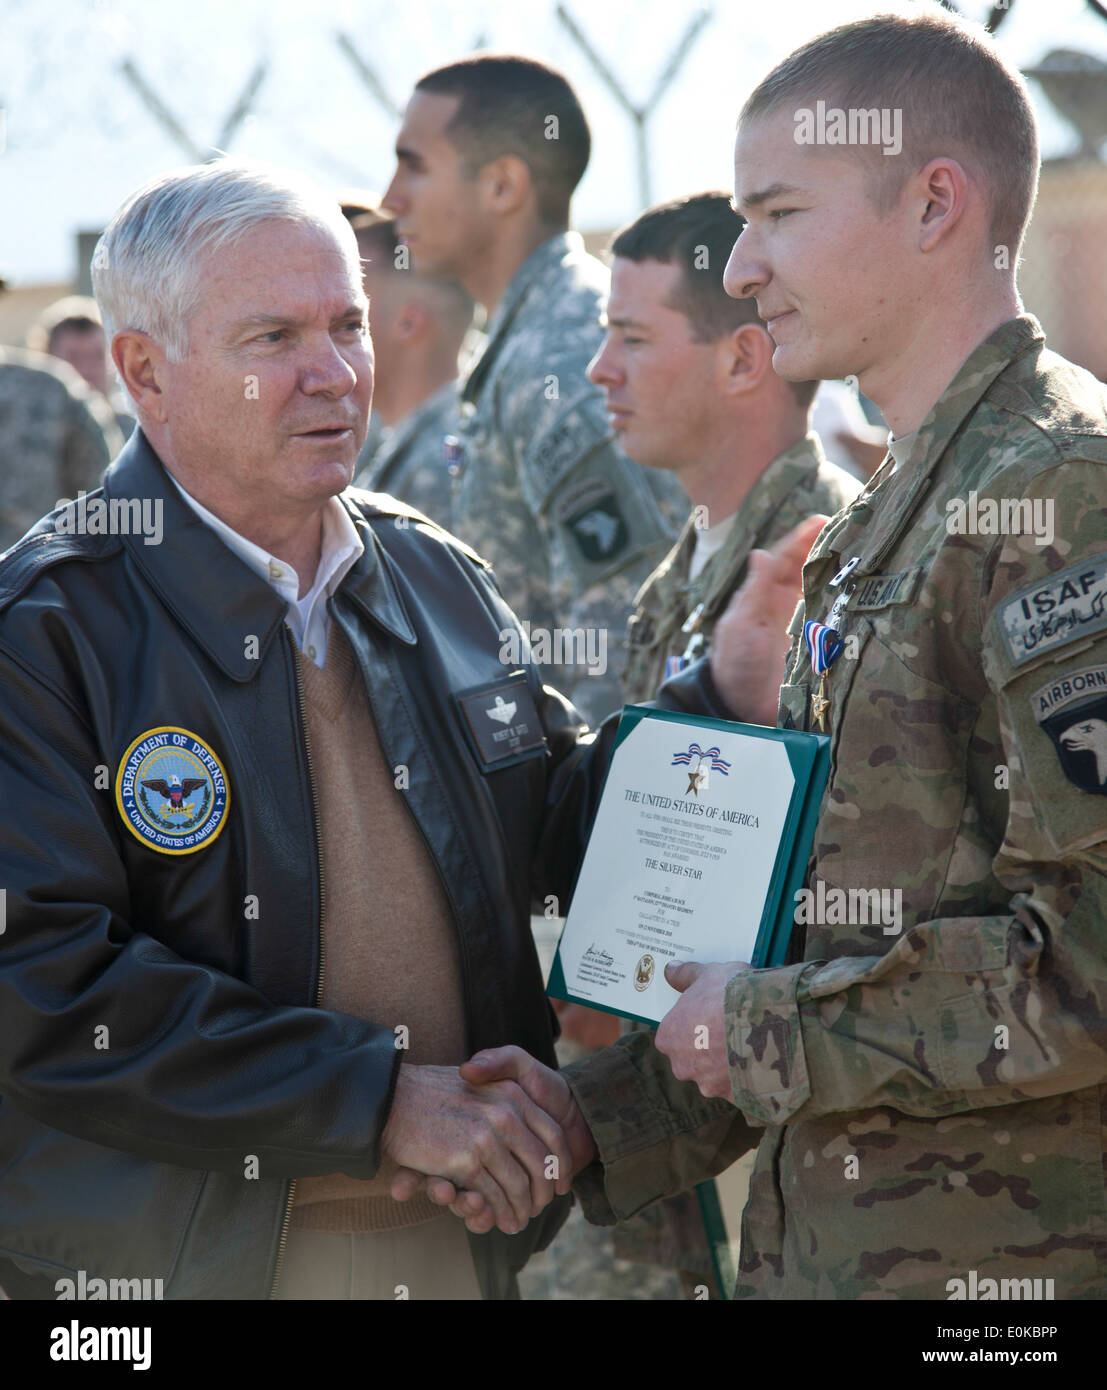 U.S Army Cpl. Joshua Busch, 1st Battalion, 327th Infantry Regiment, is awarded the Silver Star Medal by the Secretary of Defens Stock Photo